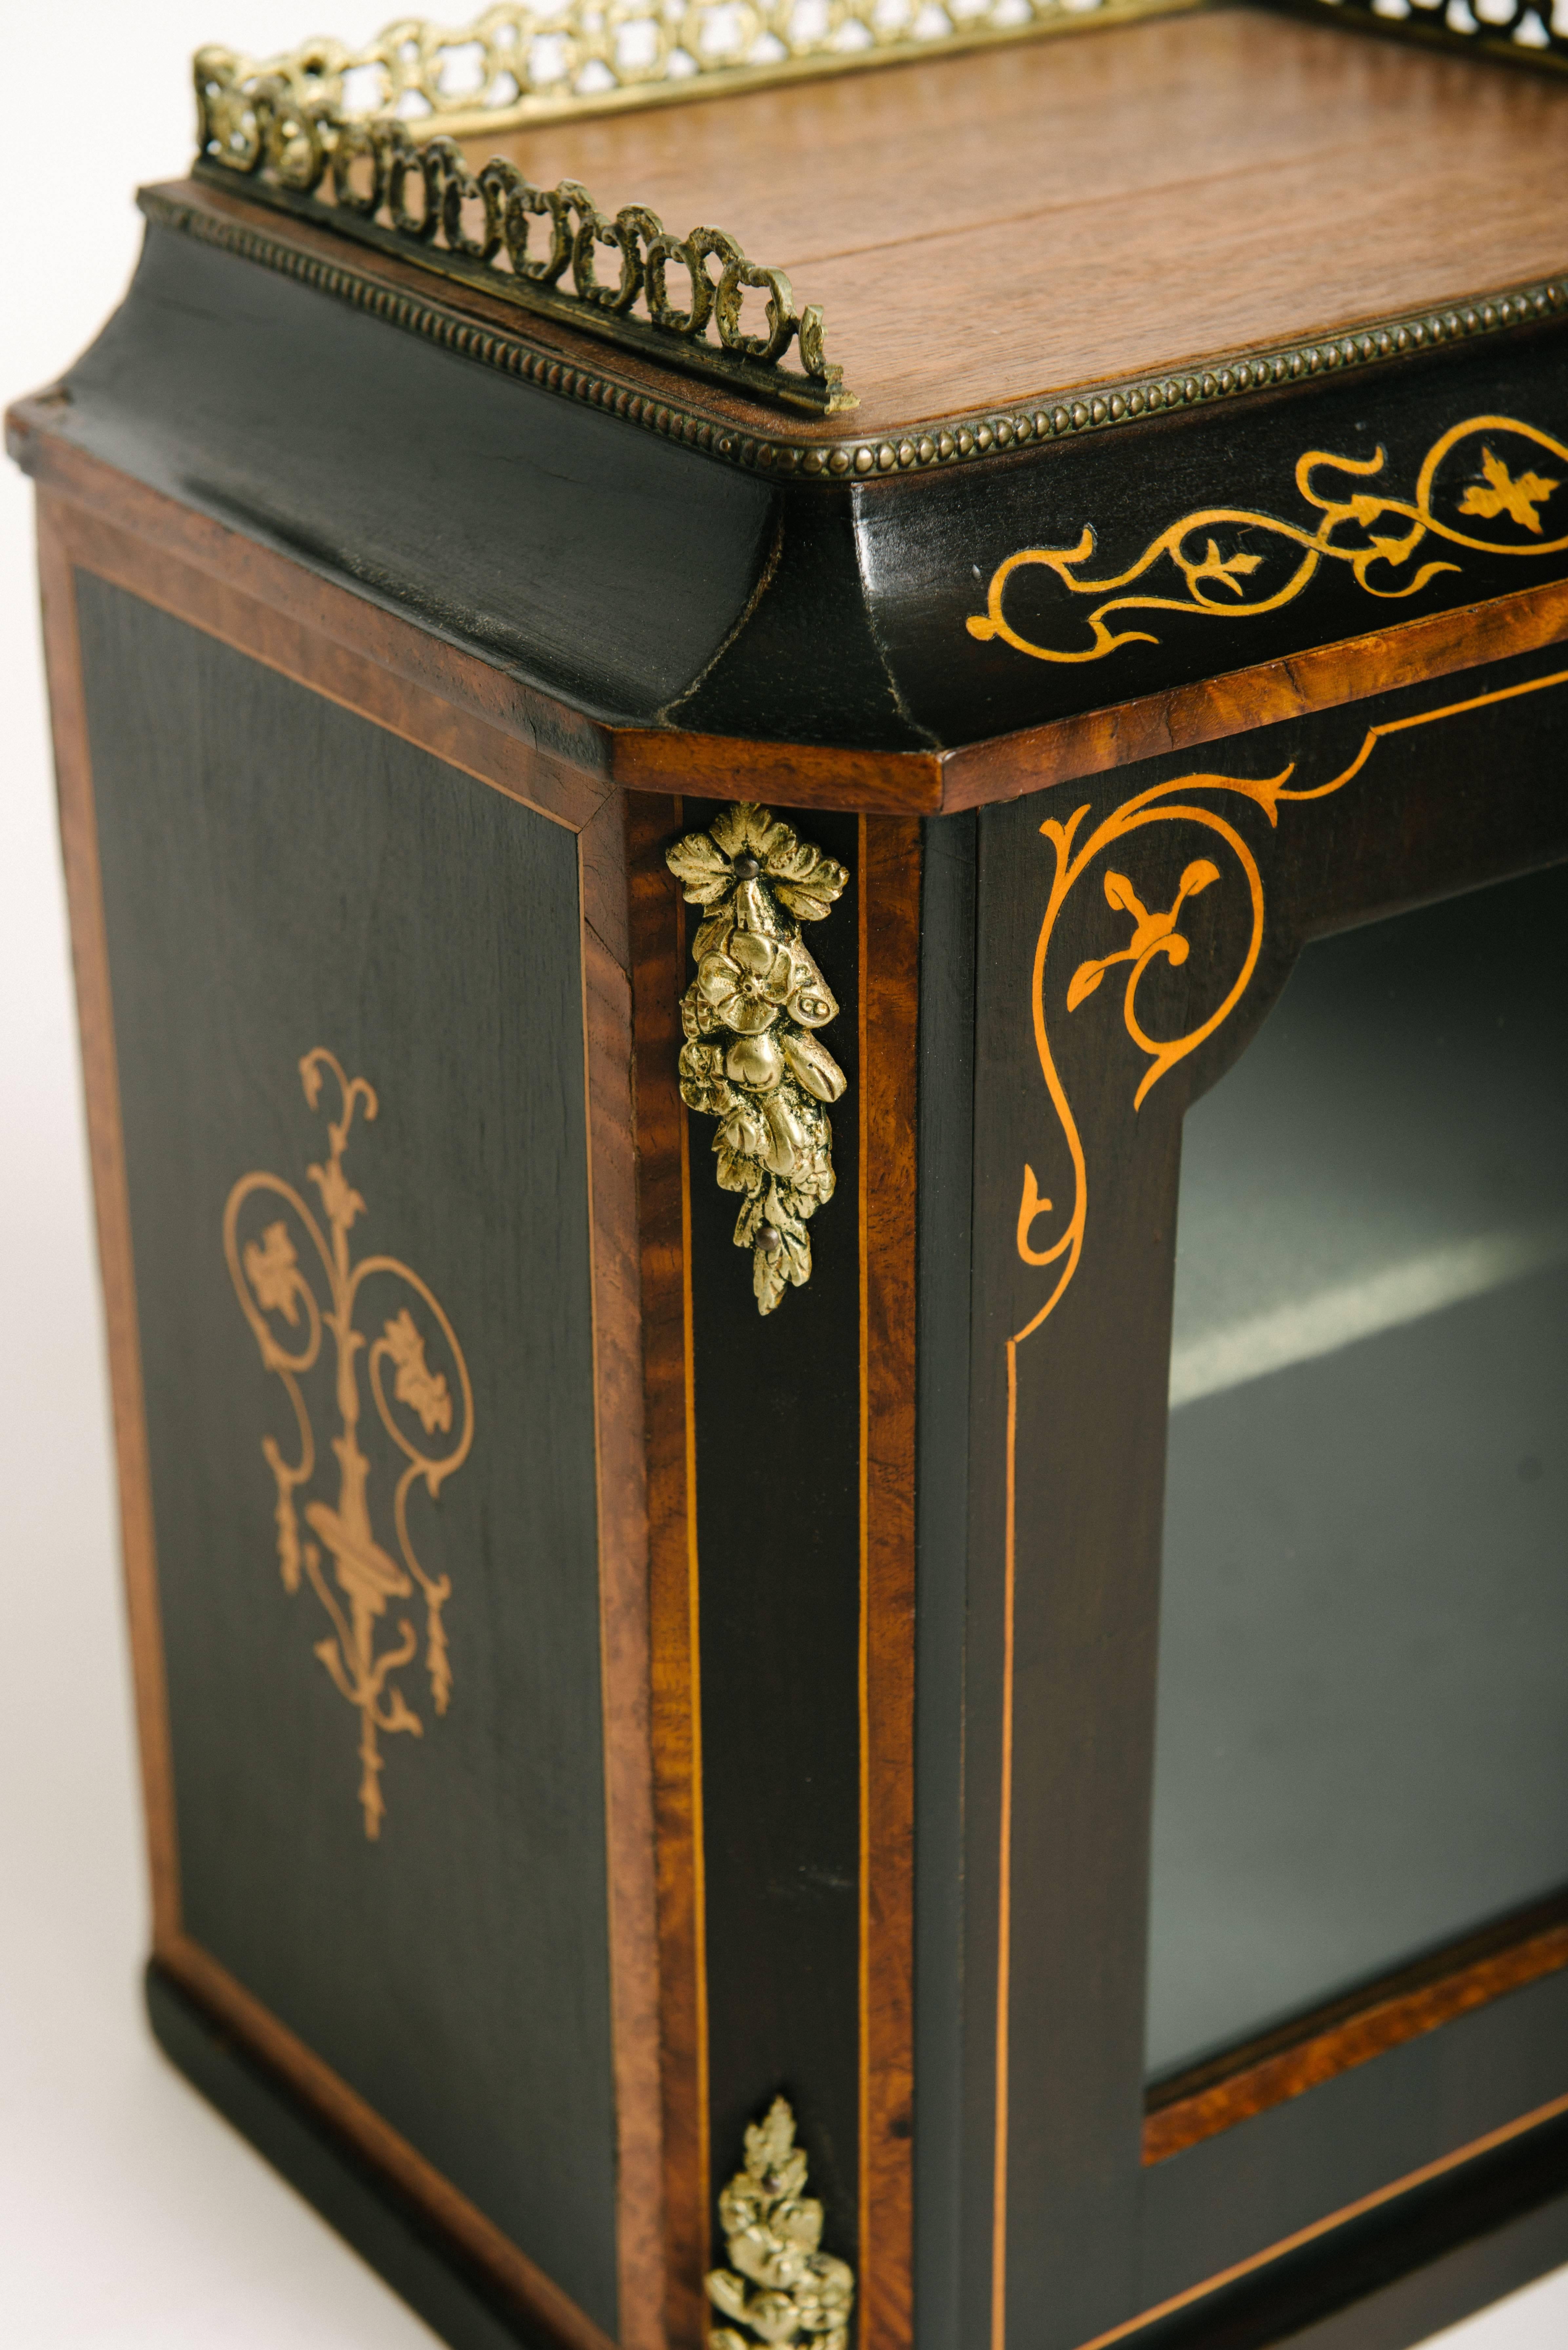 Handsome pair of 19th century Italian wall vitrines. Each petite cabinet features beautiful marquetry, bronze ormolu, glass door and single shelf.
